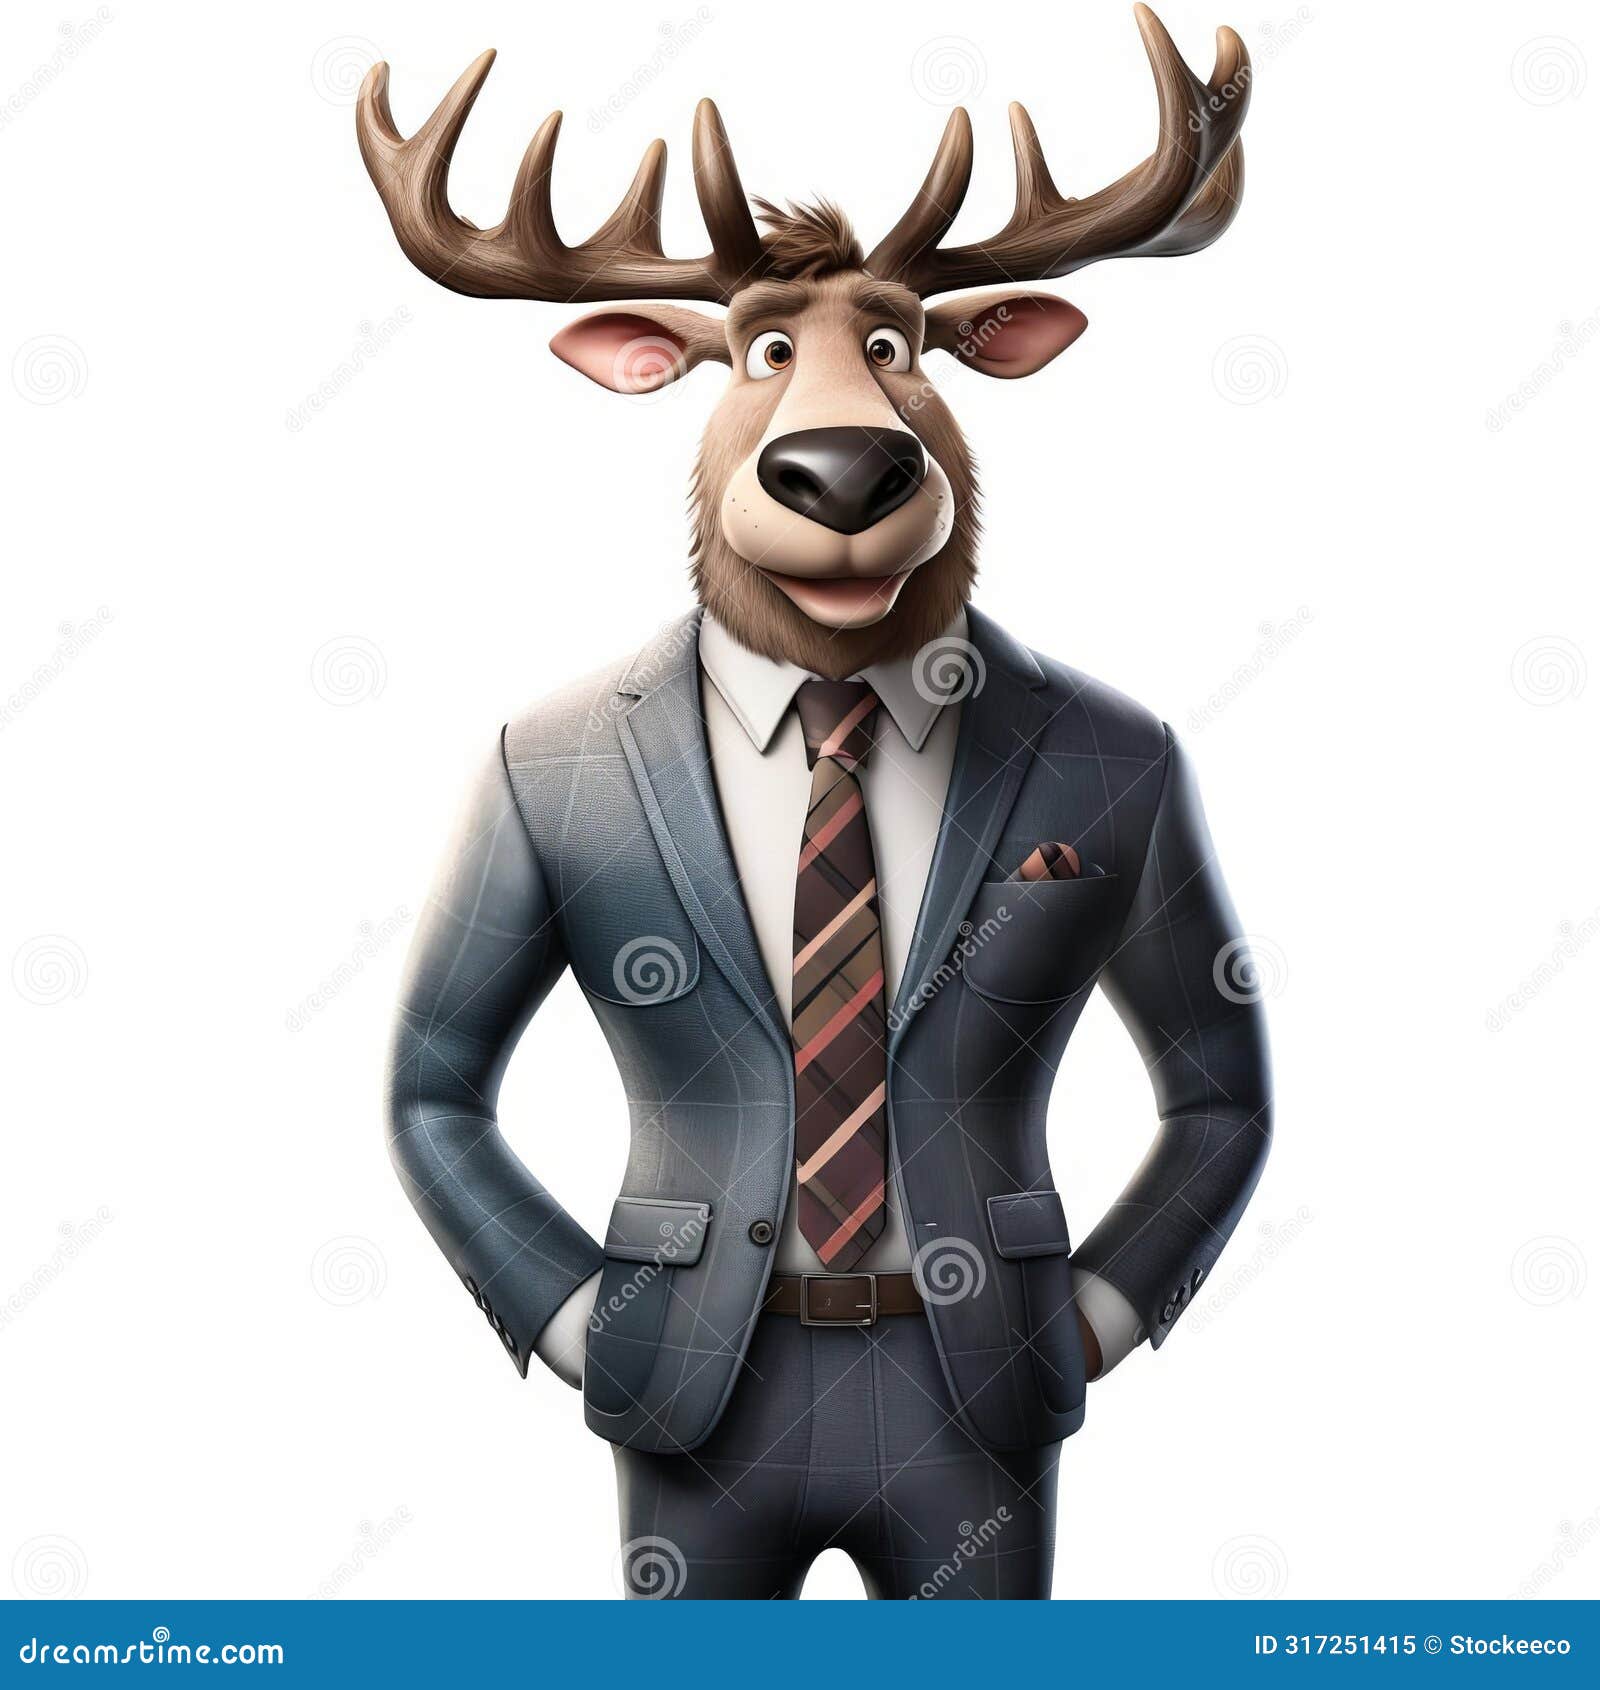 friendly caribou in a suit - hyperrealistic cartoon